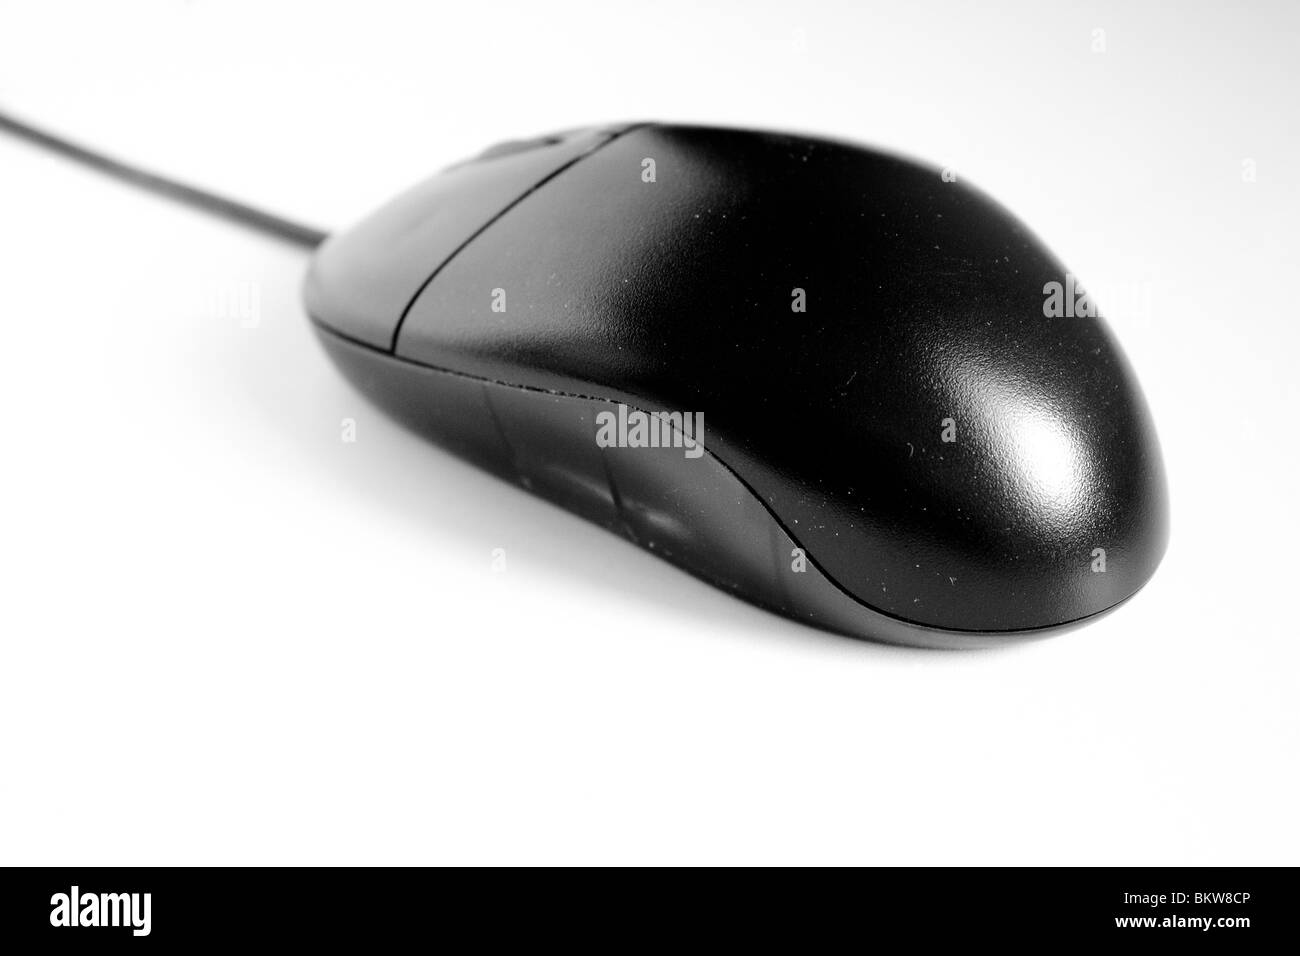 black and white wired two button wired optical computer mouse Stock Photo